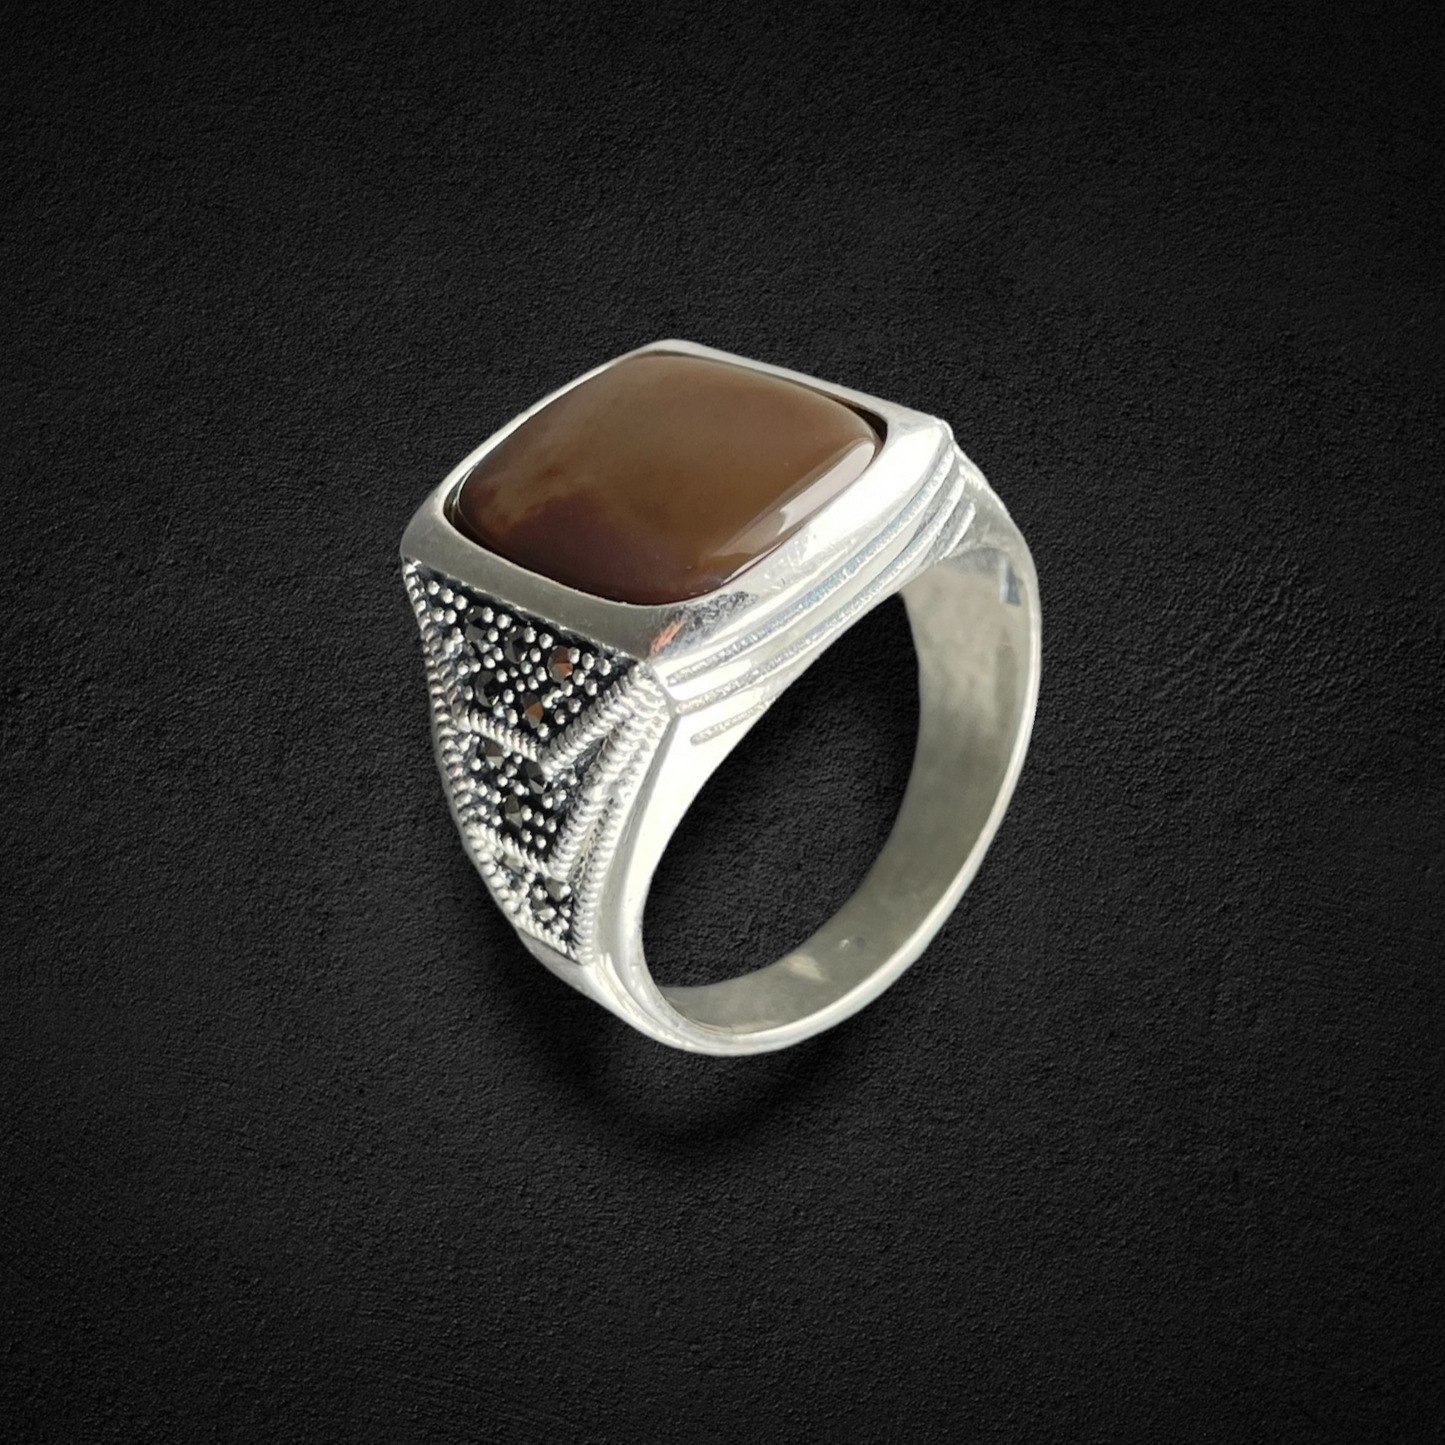 Agate Ring Sterling silver 925